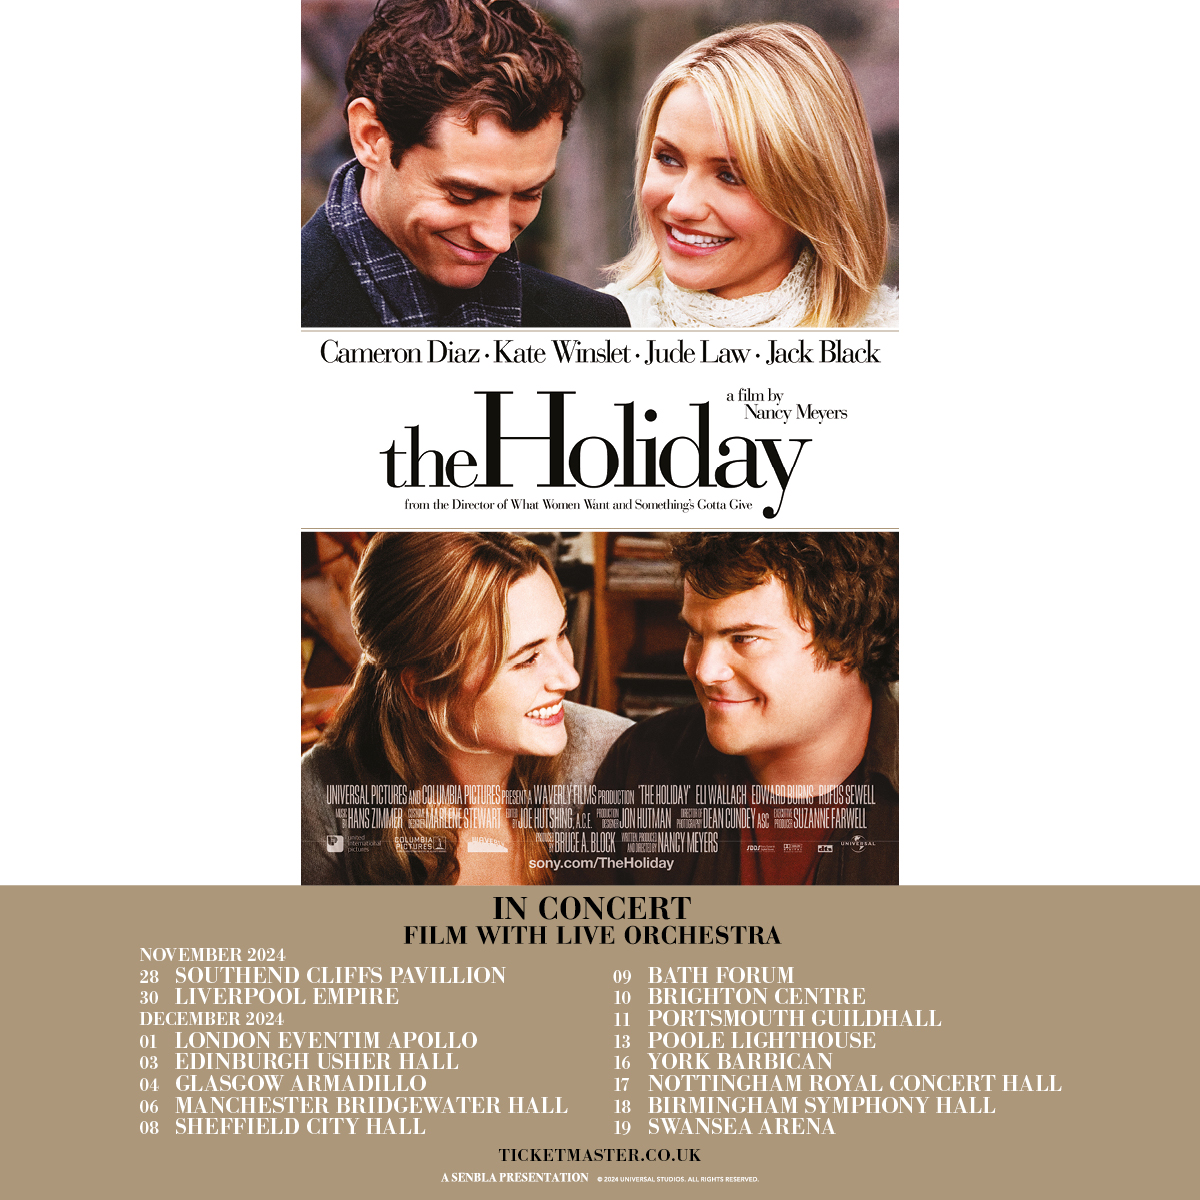 Beloved Christmas romcom, 'The Holiday' (2006), is to be presented live in concert this festive season, which will see the film’s score played live-to-film with a complete concert orchestra and cinema-size screen. On sale Friday >>> bit.ly/3R1TE0y